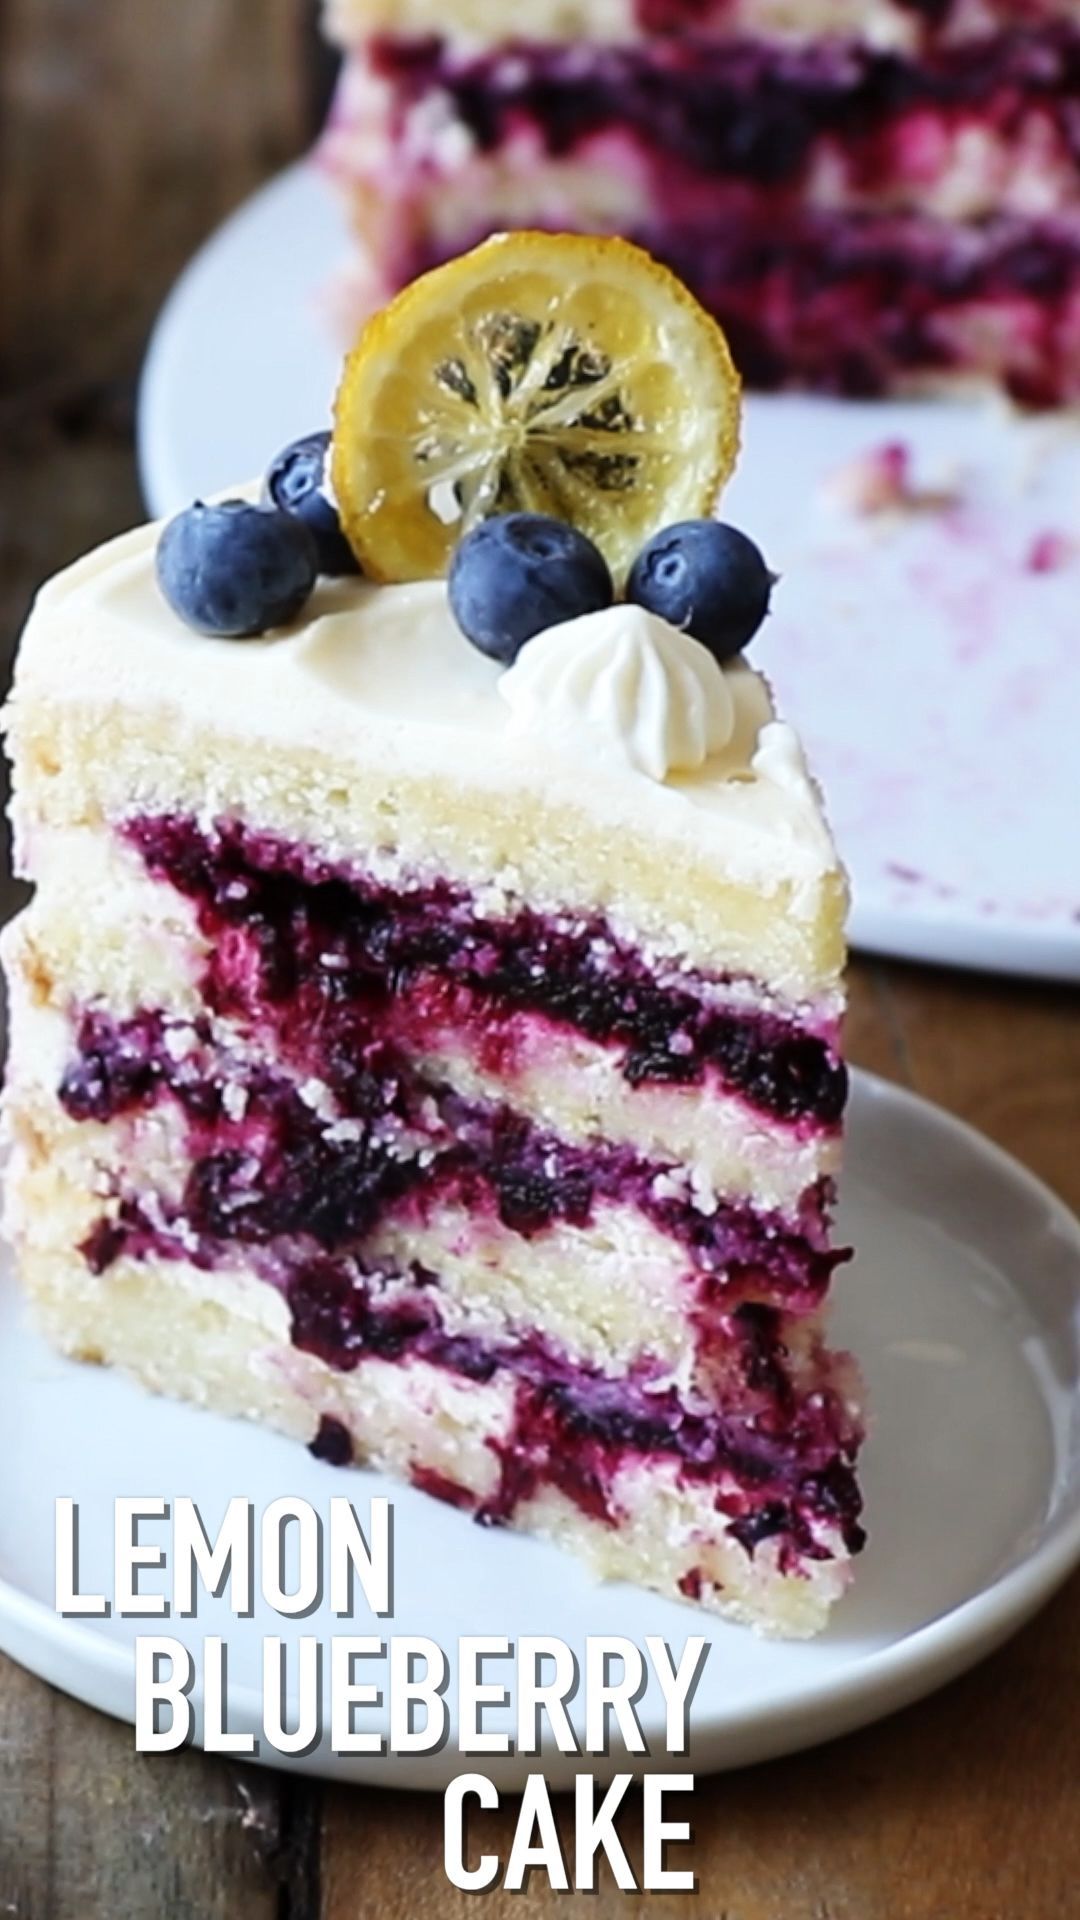 13 cake Blueberry sweets ideas